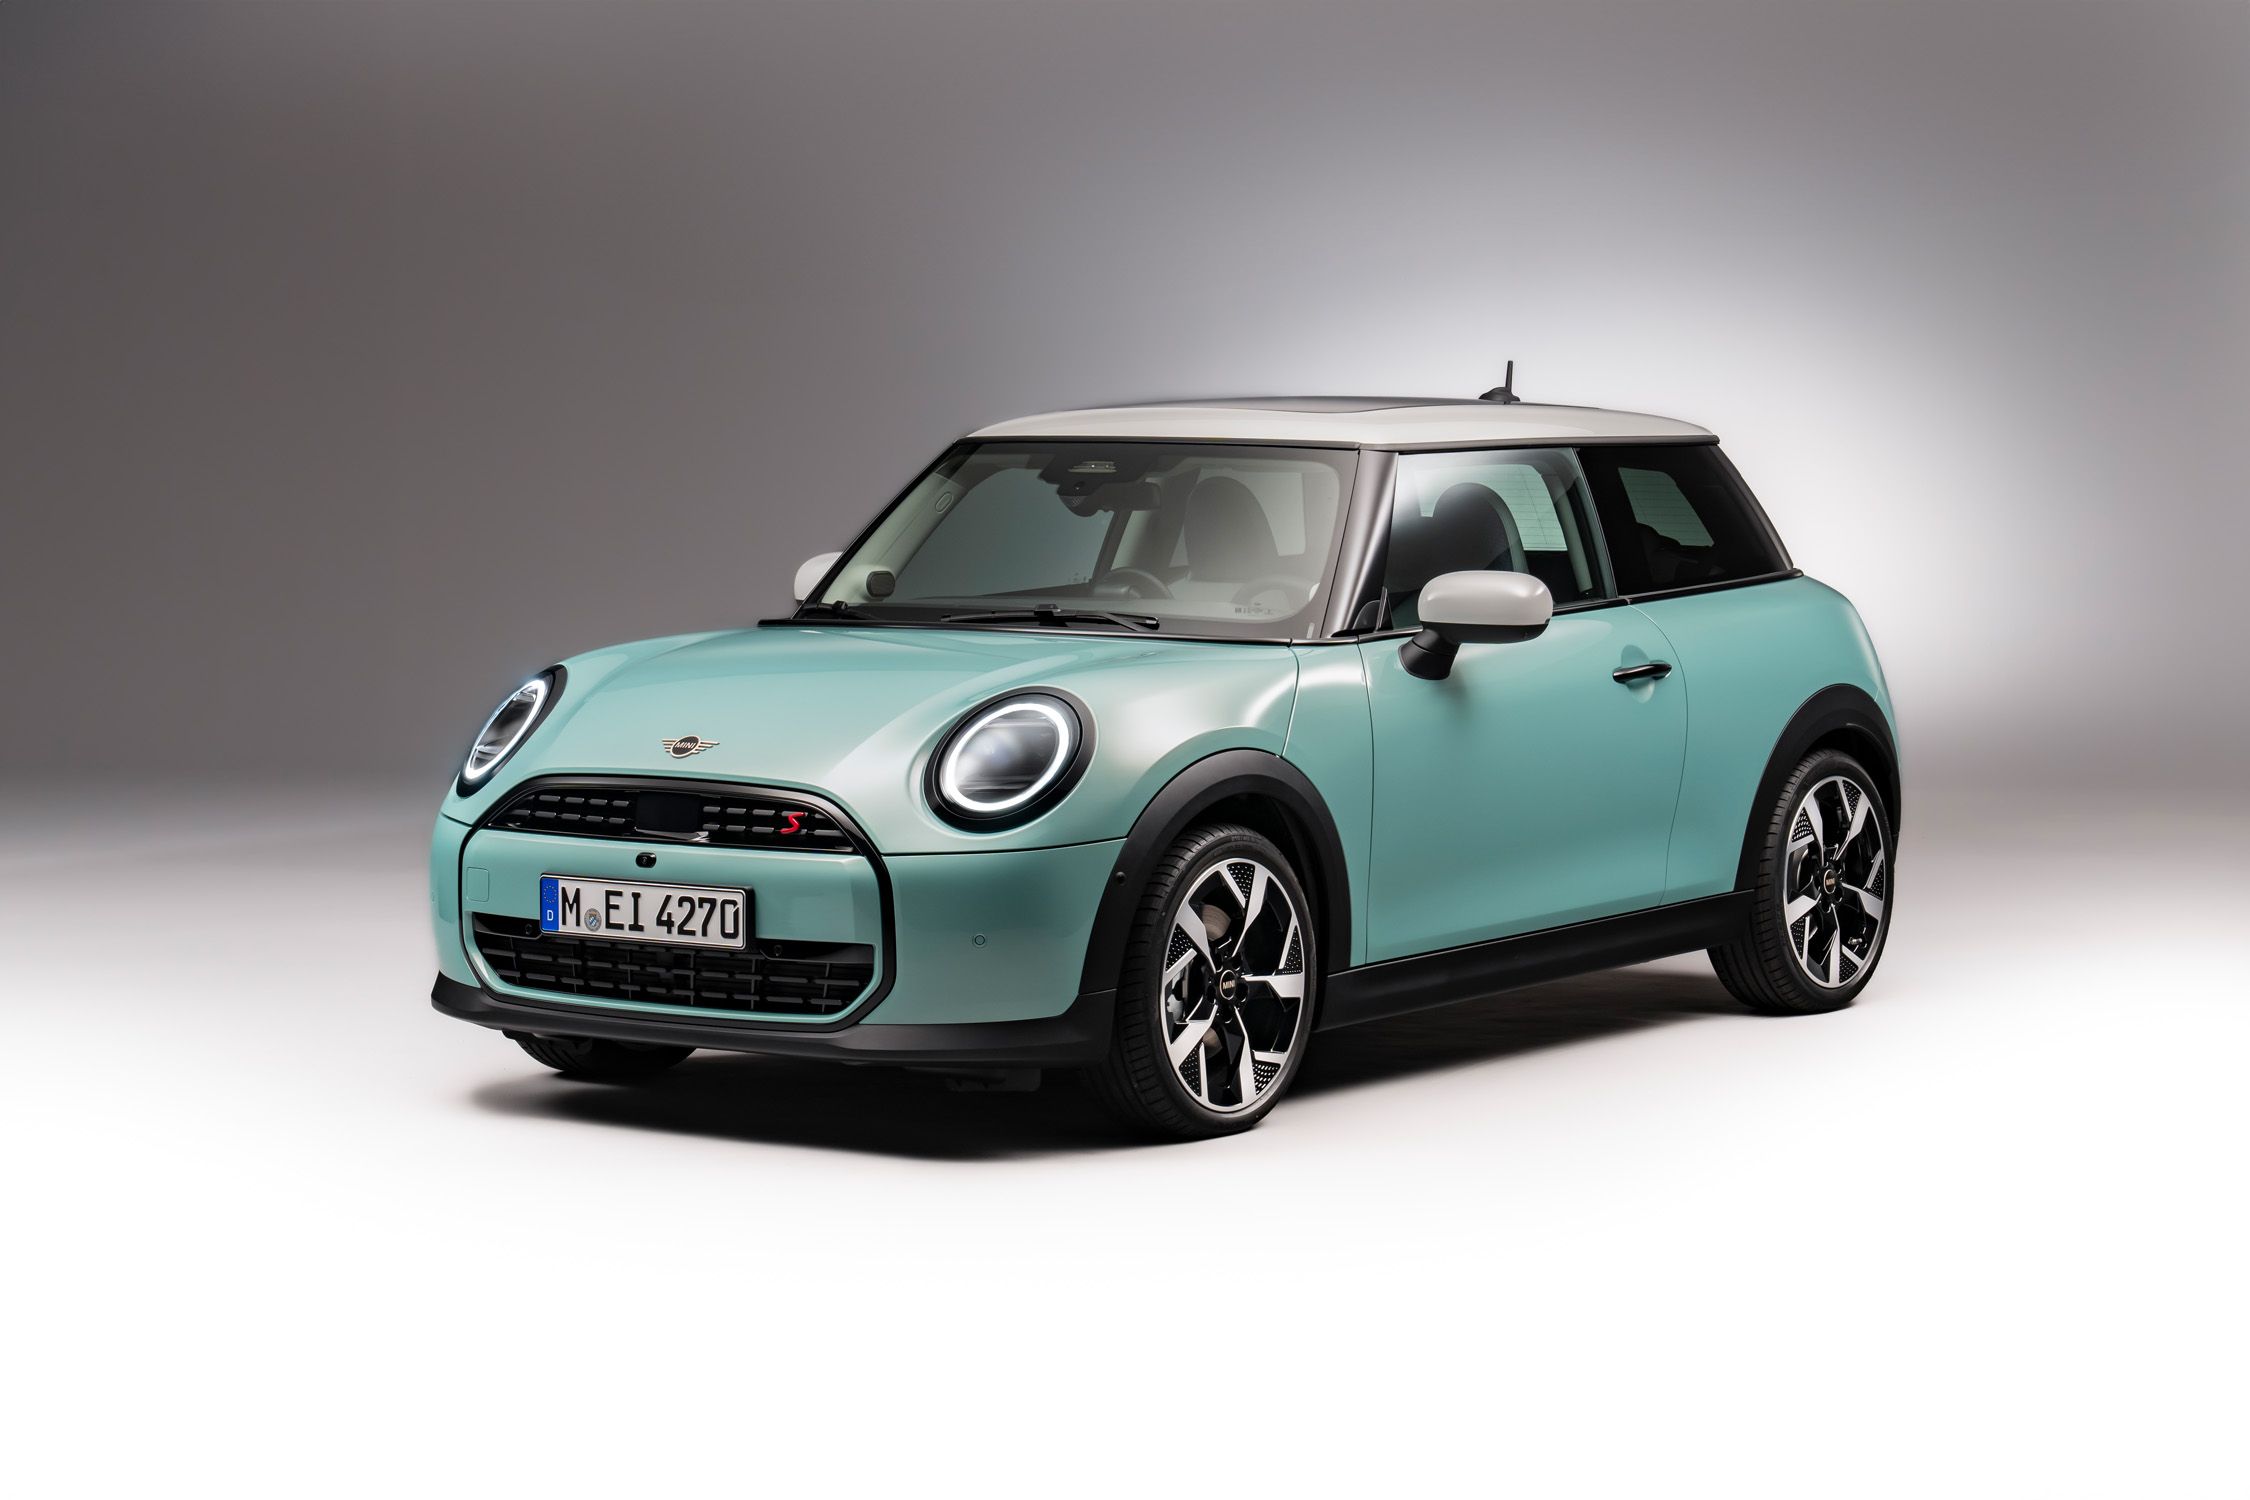 The new Mini Cooper Electric gets a brand new look and a lot more range